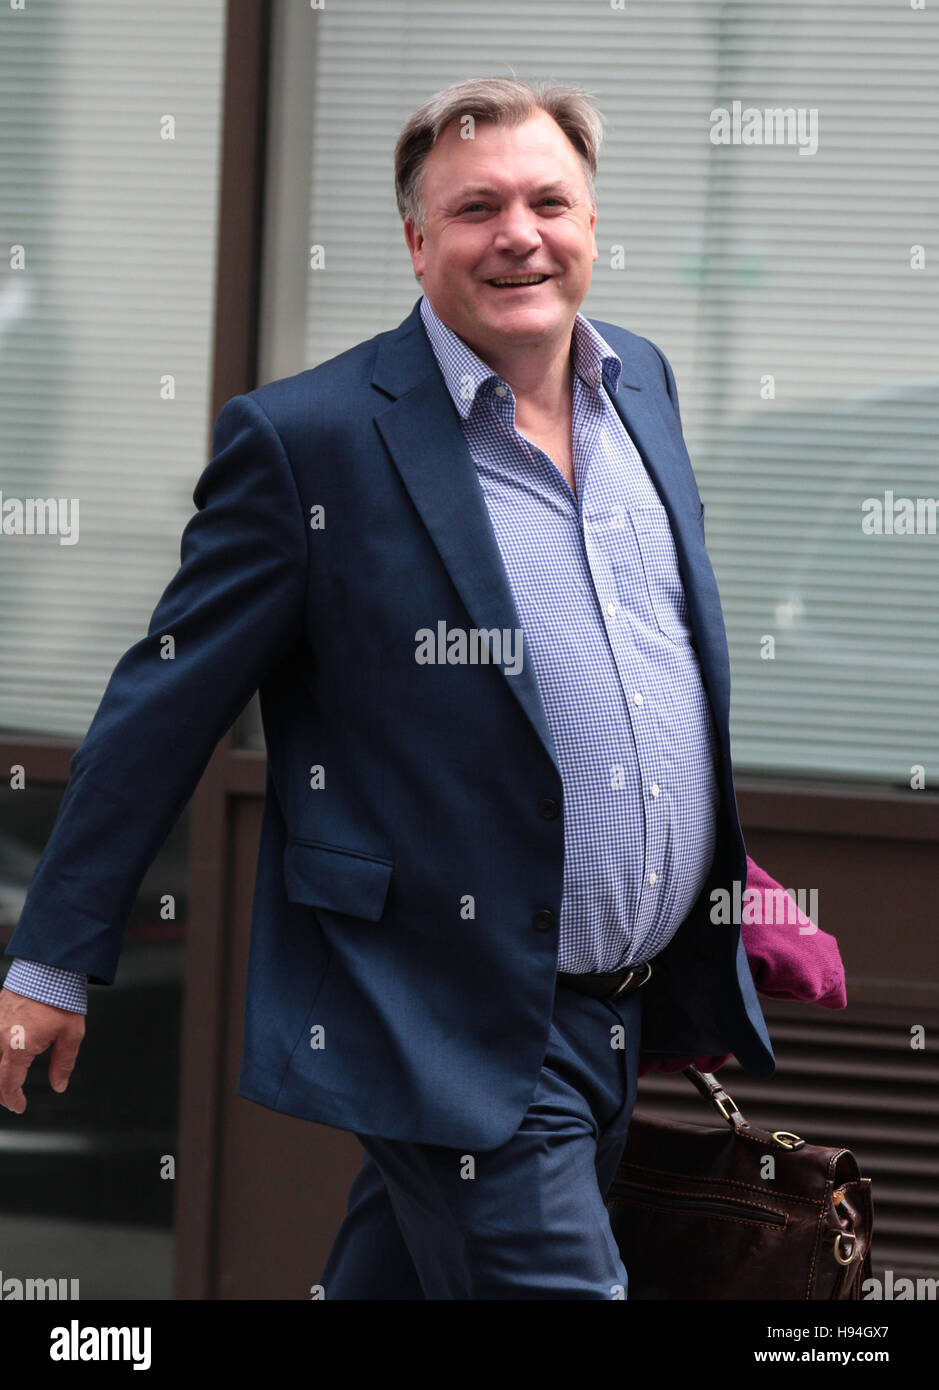 Ed Balls, Strictly Come Dancing contestant seen at the BBC studios London on 04 Sep, 2016 Stock Photo